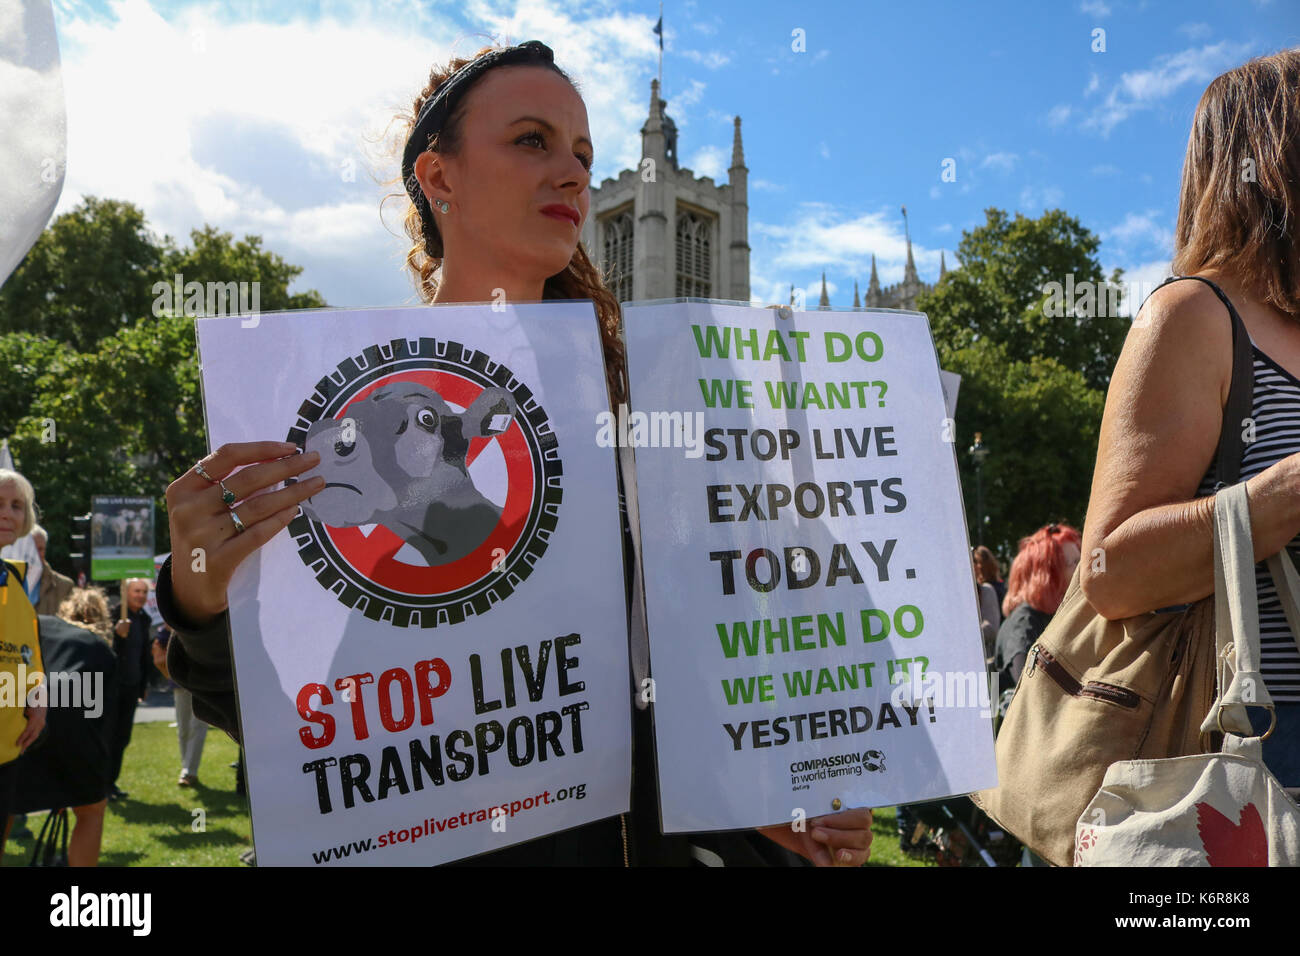 London, UK. 13th Sep, 2017. Animal rights groups campaigned in Parliament Square as part of Compassion for World Farming  to highlight the inhumane treatment and suffering of Millions of live animals beeing transported thousands of kilometres  and   ban the live exports of animals as they face slaughter Credit: amer ghazzal/Alamy Live News Stock Photo